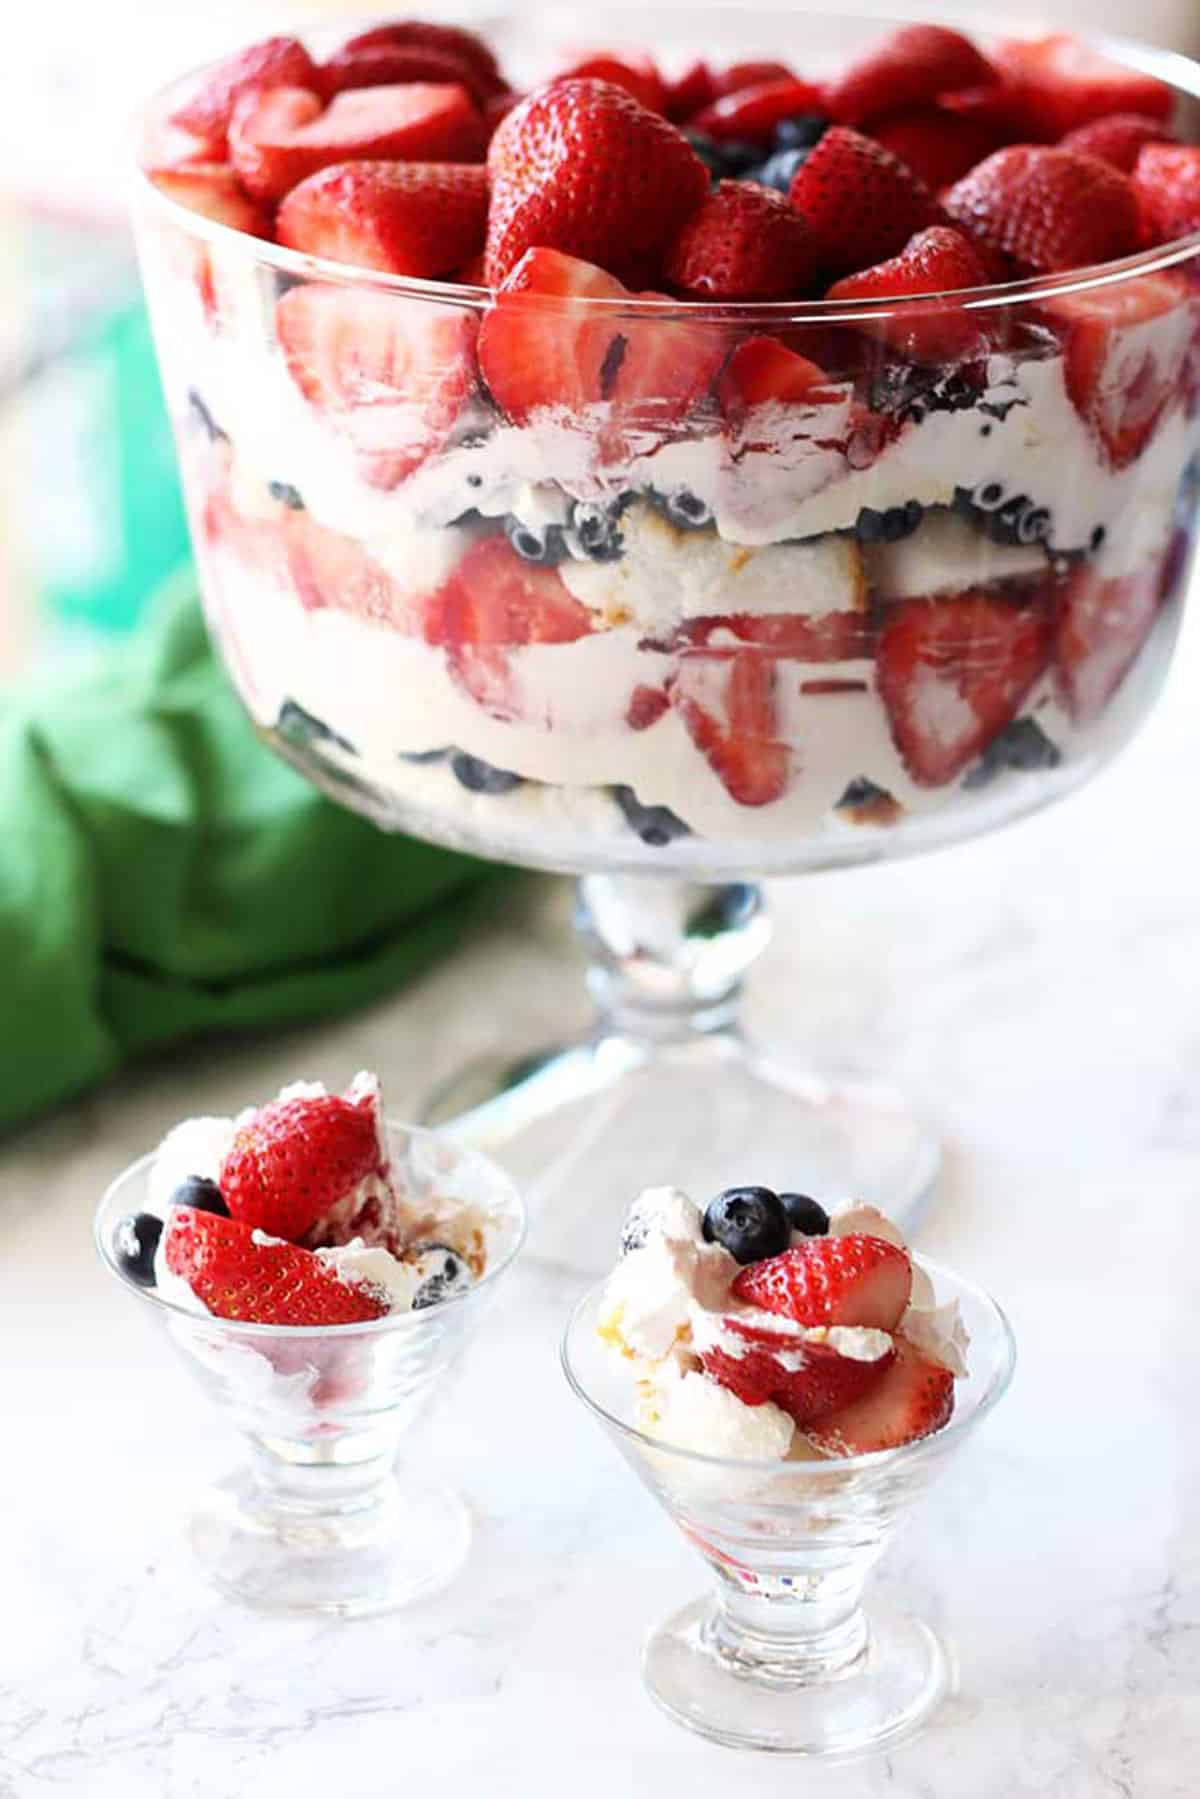 Strawberry and blueberry trifle sitting on a white table, 2 parfait glasses containing trifle topped with strawberries and blueberries.